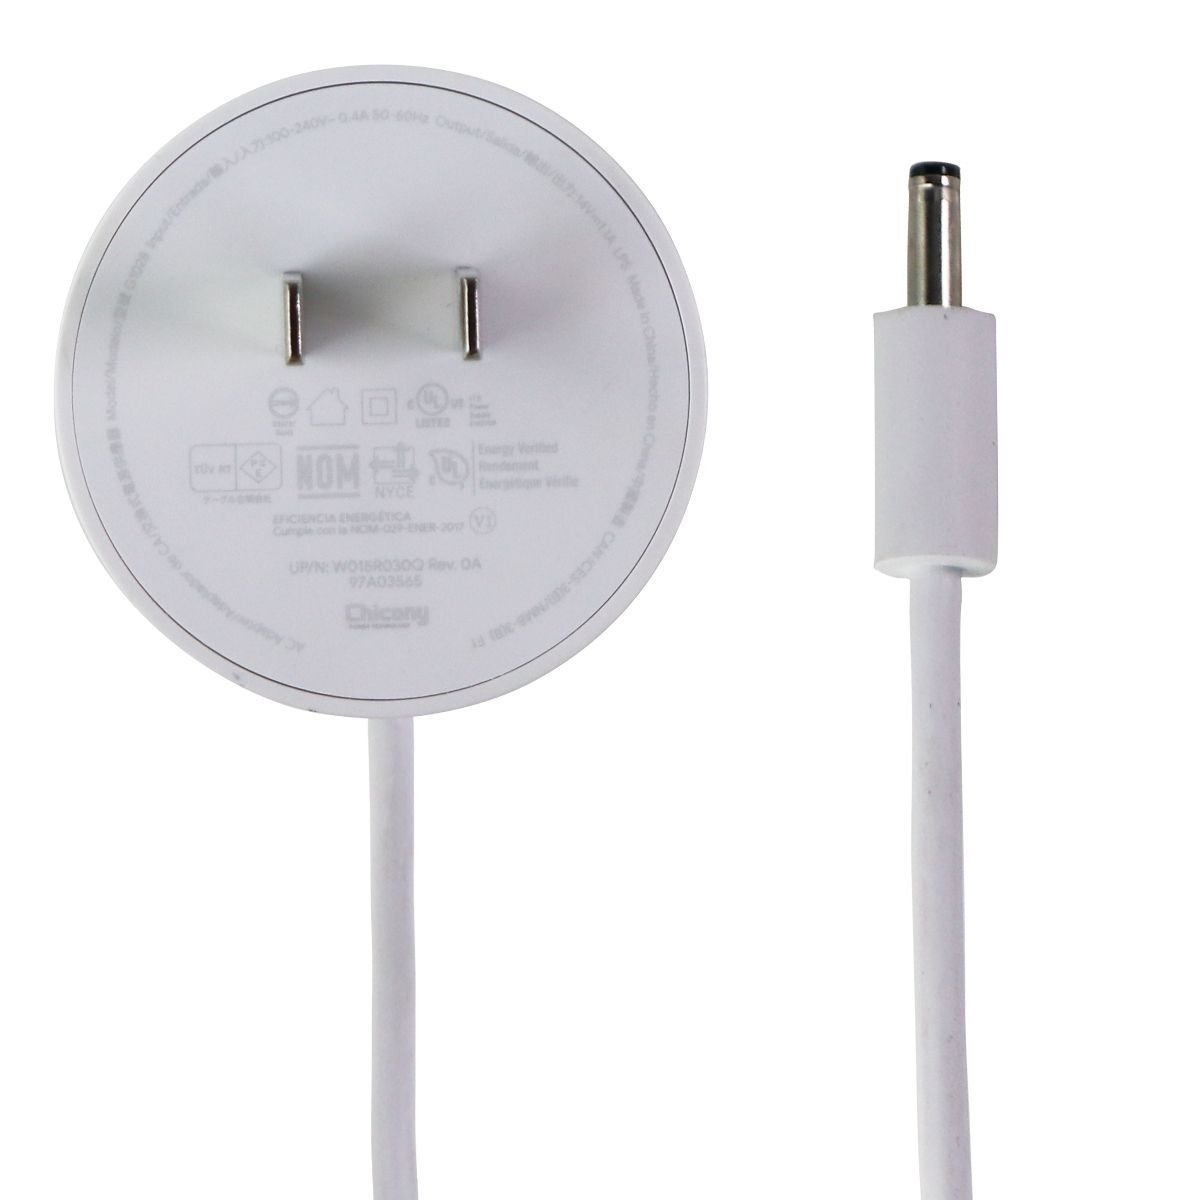 Google Home Hub Power Charger/Adapter (14V 1.1A) - W18-015N1A G1028 G1015 White